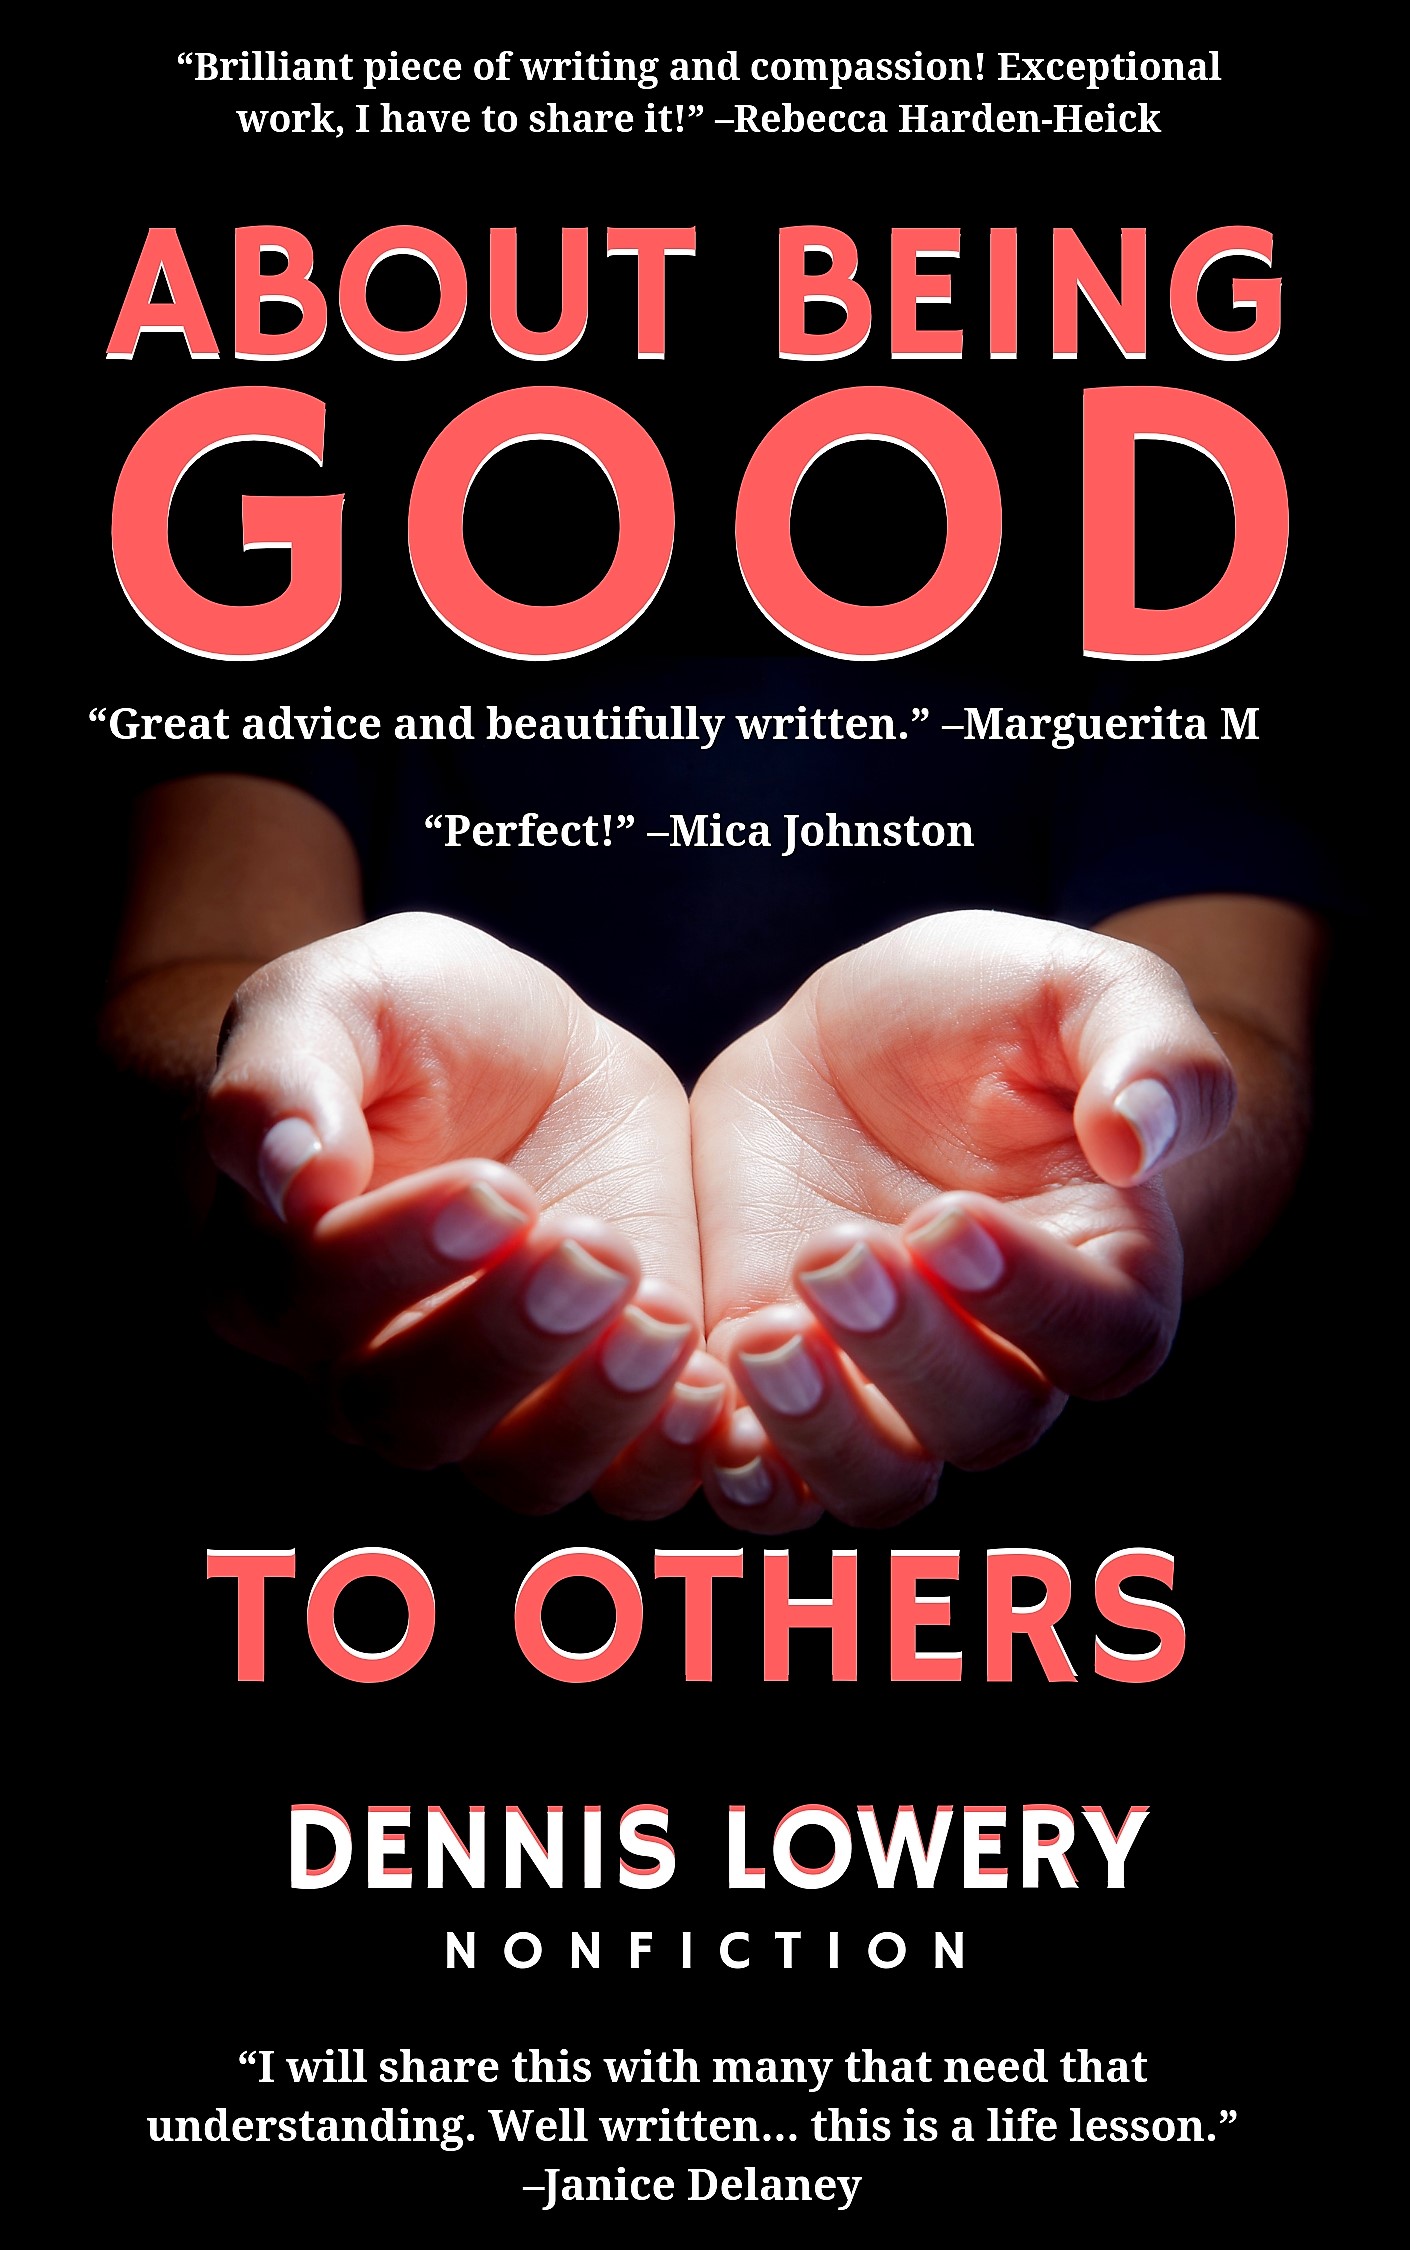 About Being Good... to Others - Dennis Lowery